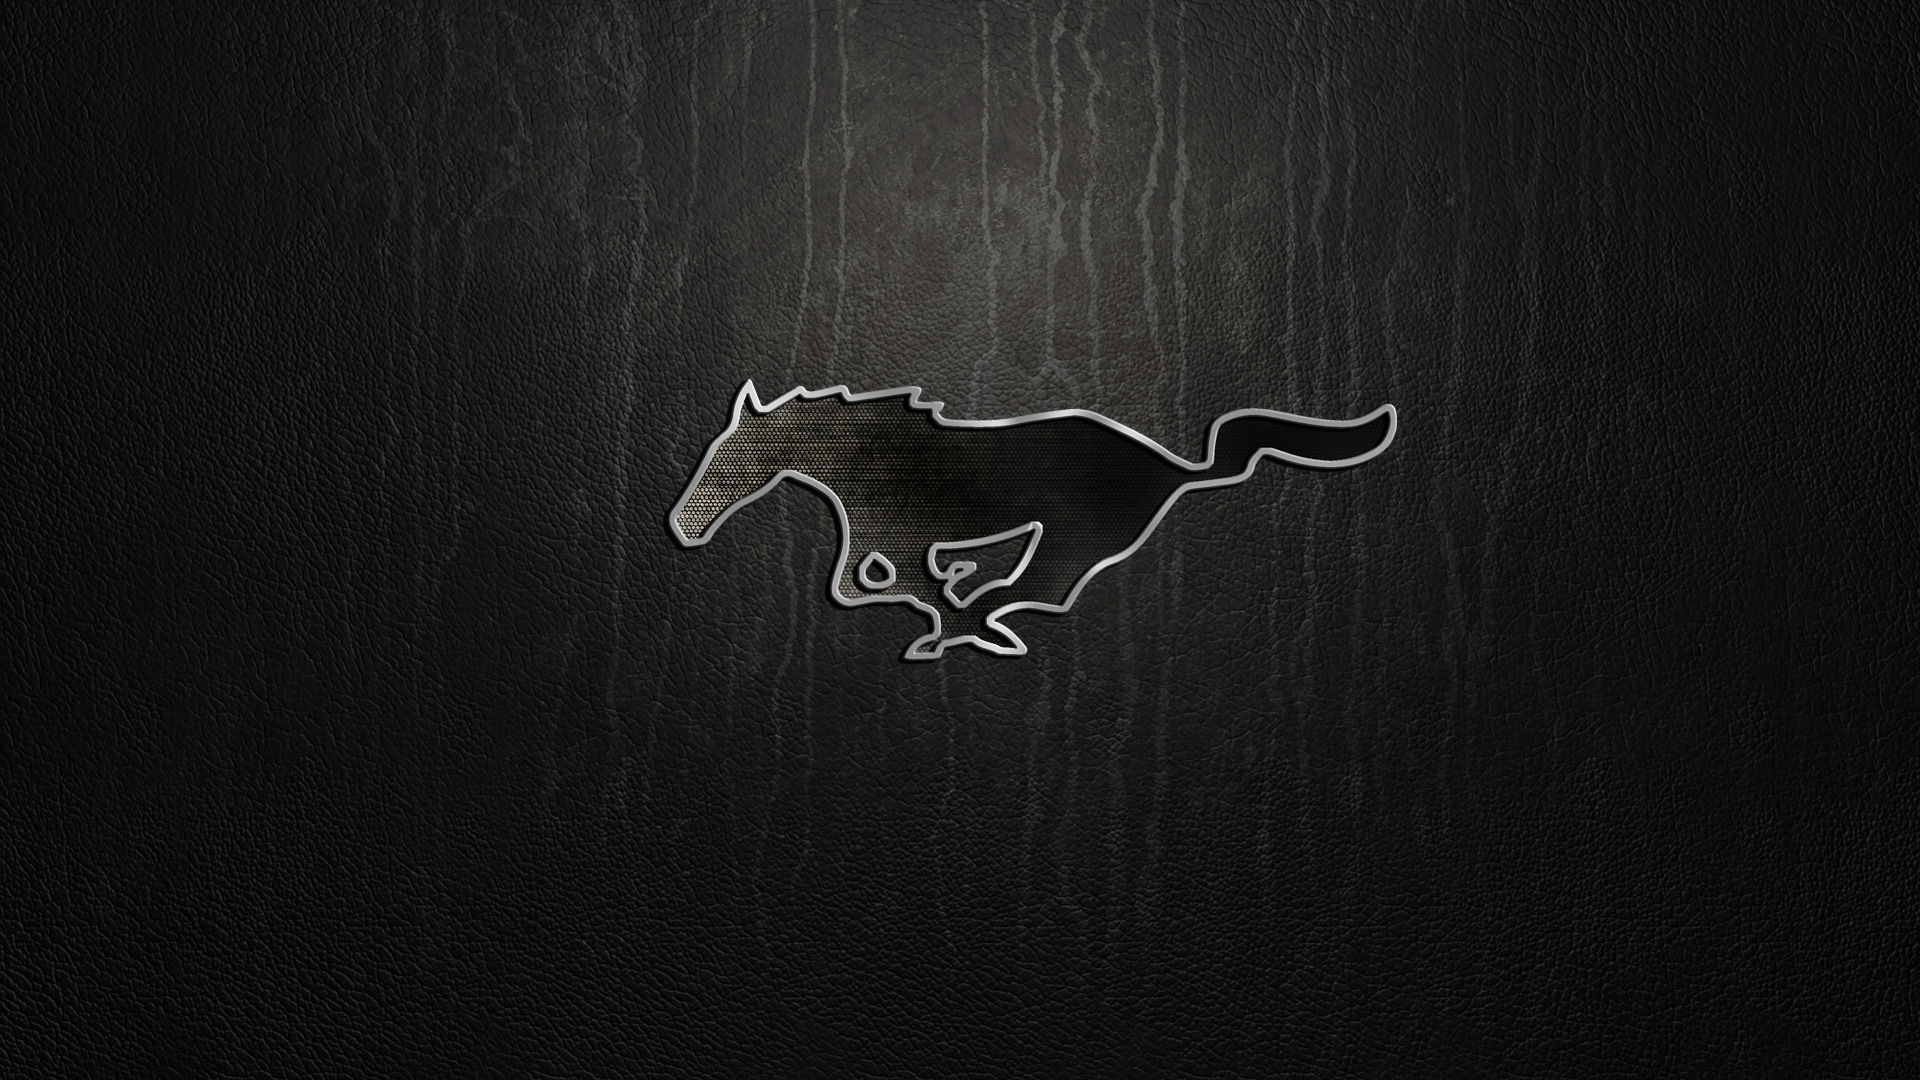 General 1920x1080 Ford Mustang logo texture Ford car muscle cars American cars